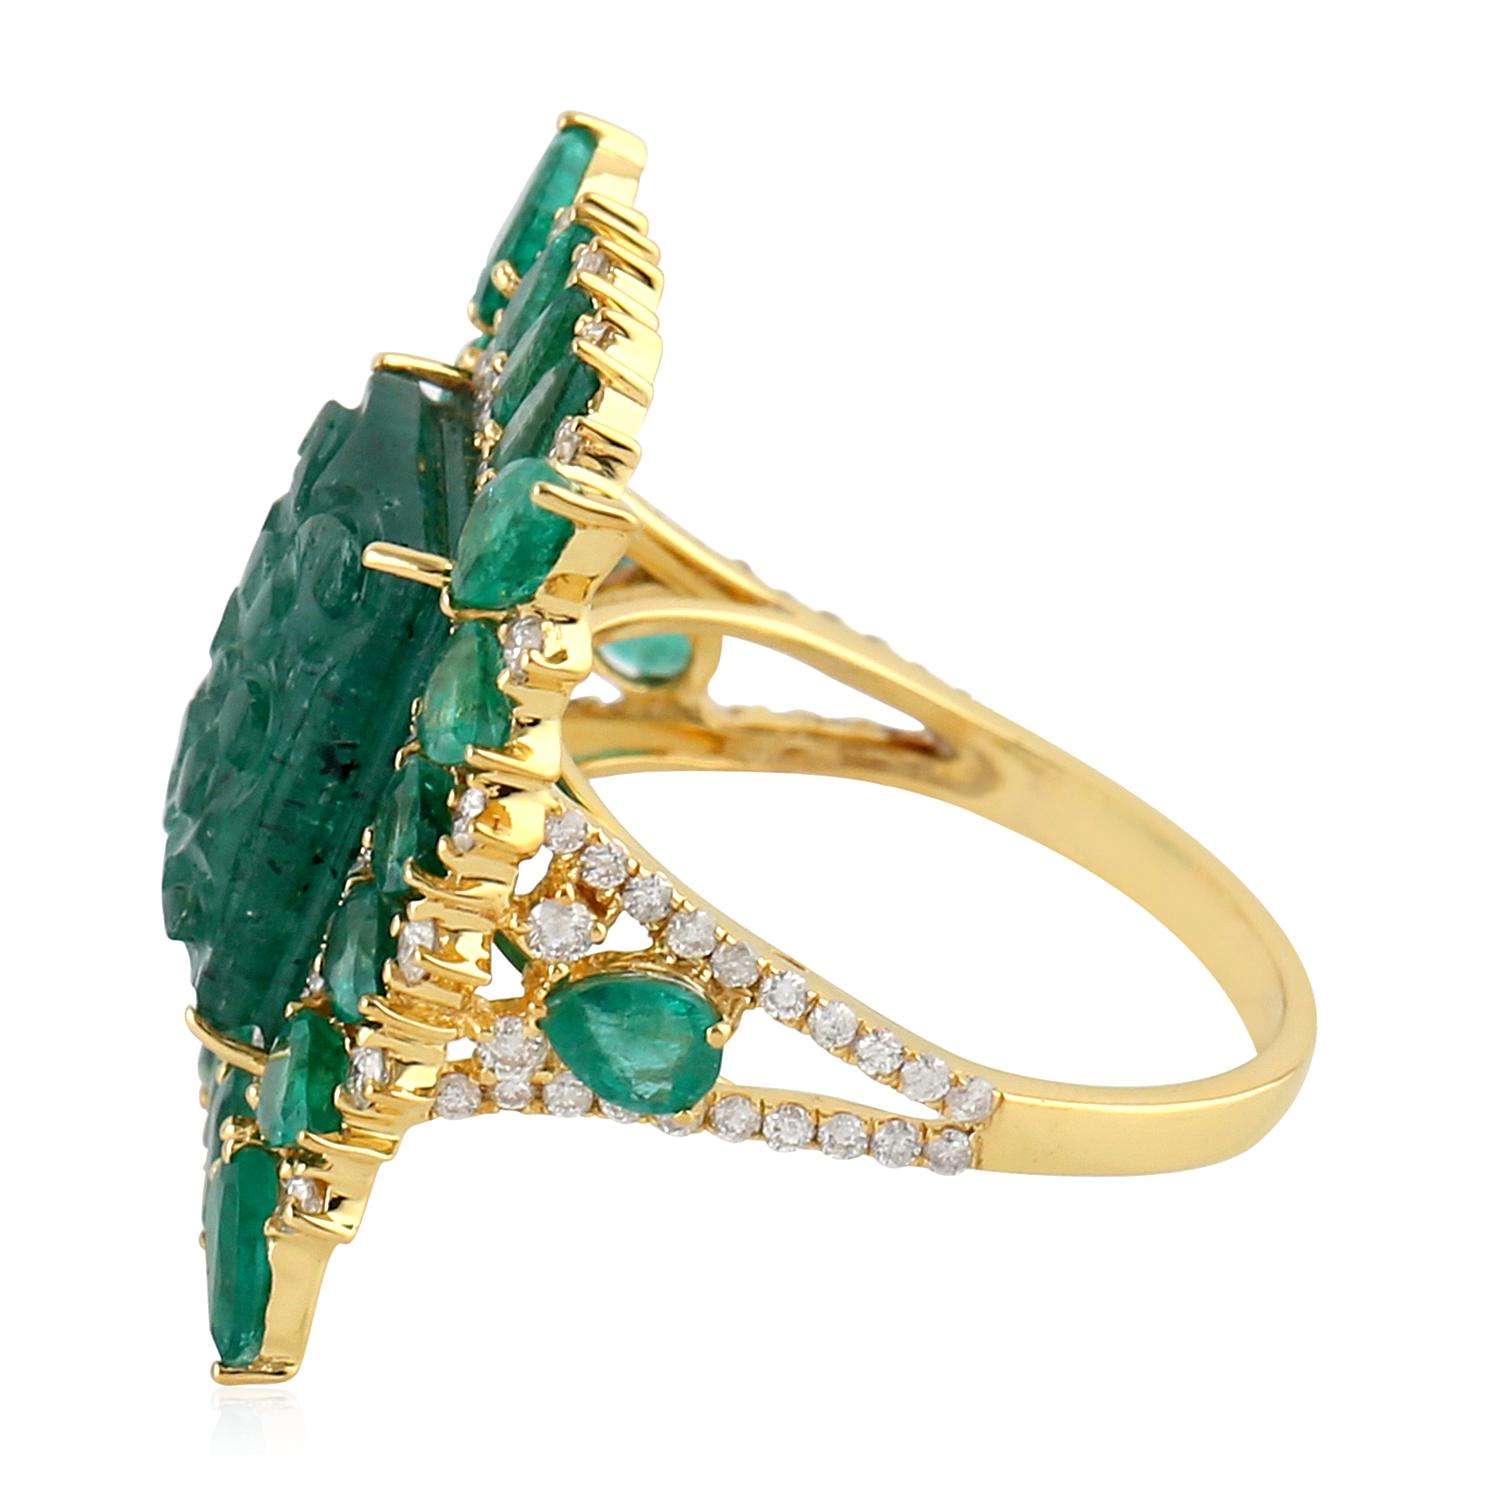 Mixed Cut Square Shape Emerald Cocktail Ring with Diamonds Made in 18k Yellow Gold For Sale